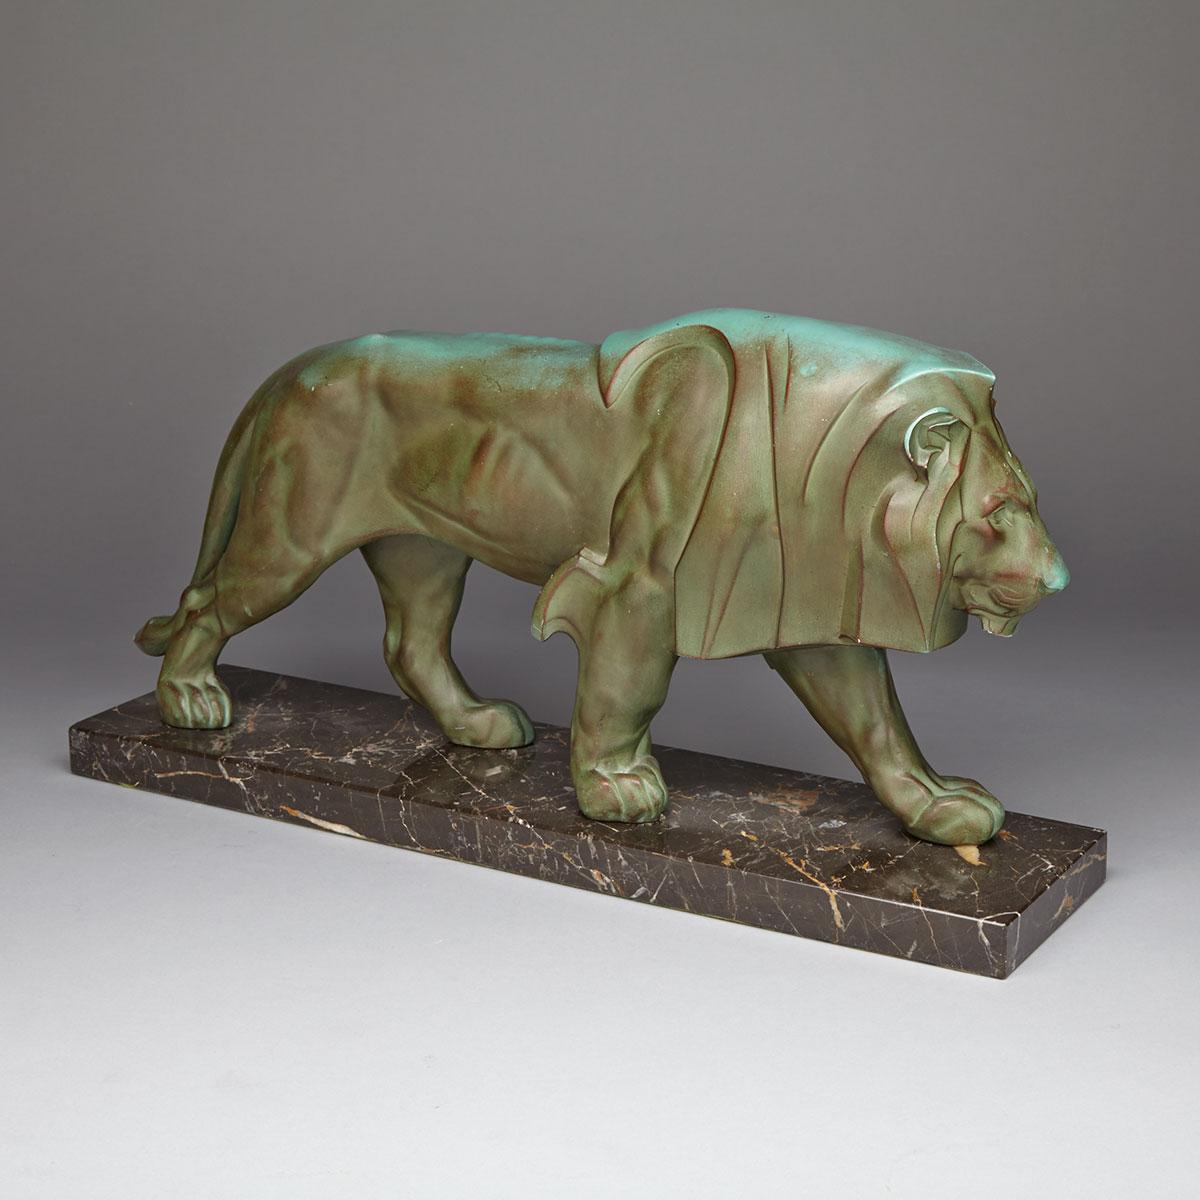 French Art Deco Bronze Patinated Metal Figure of a Lion, mid 20th century